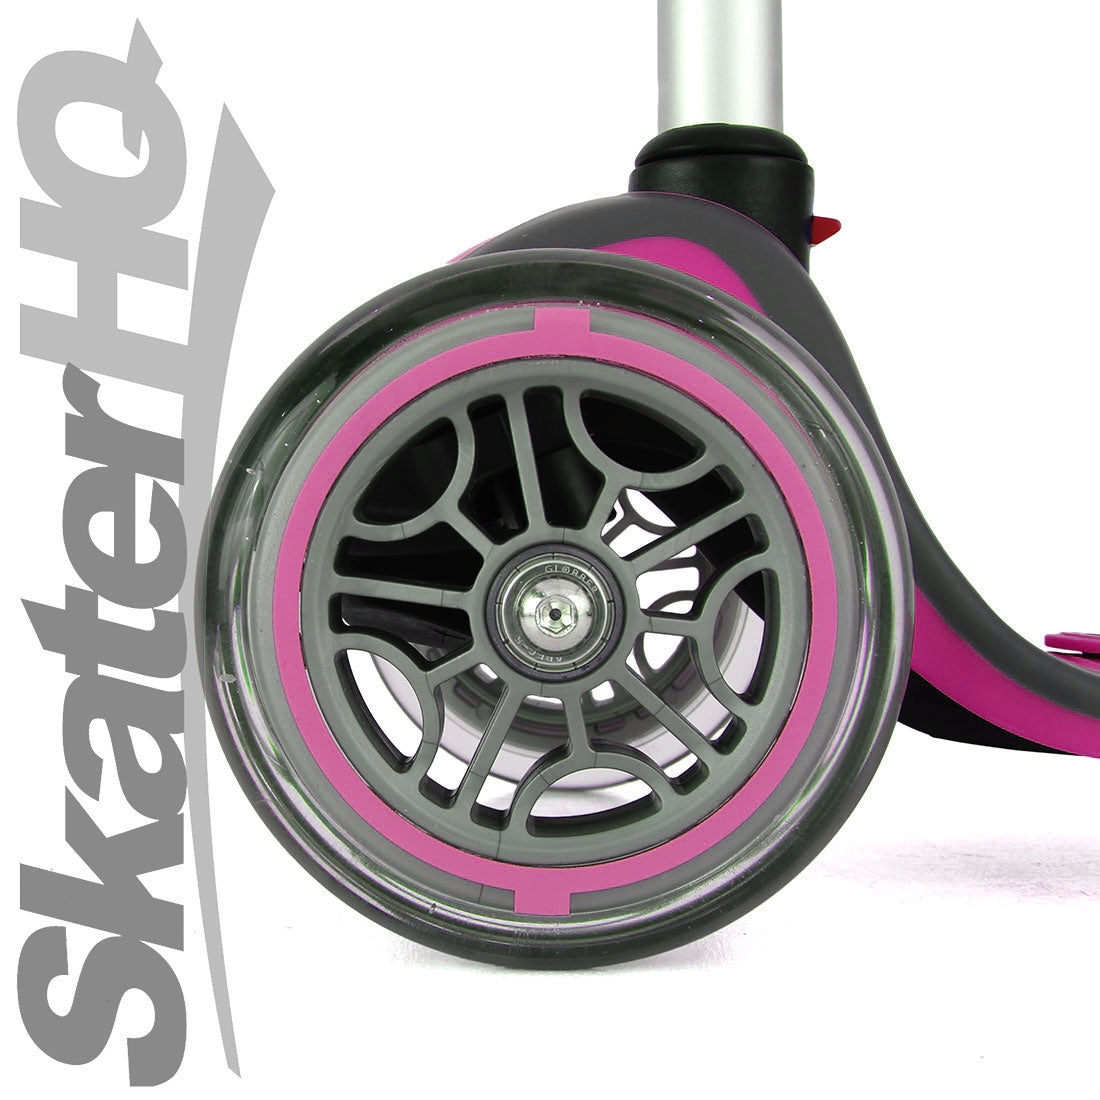 Globber EVO Comfort Convertible - Pink Scooter Completes Rec